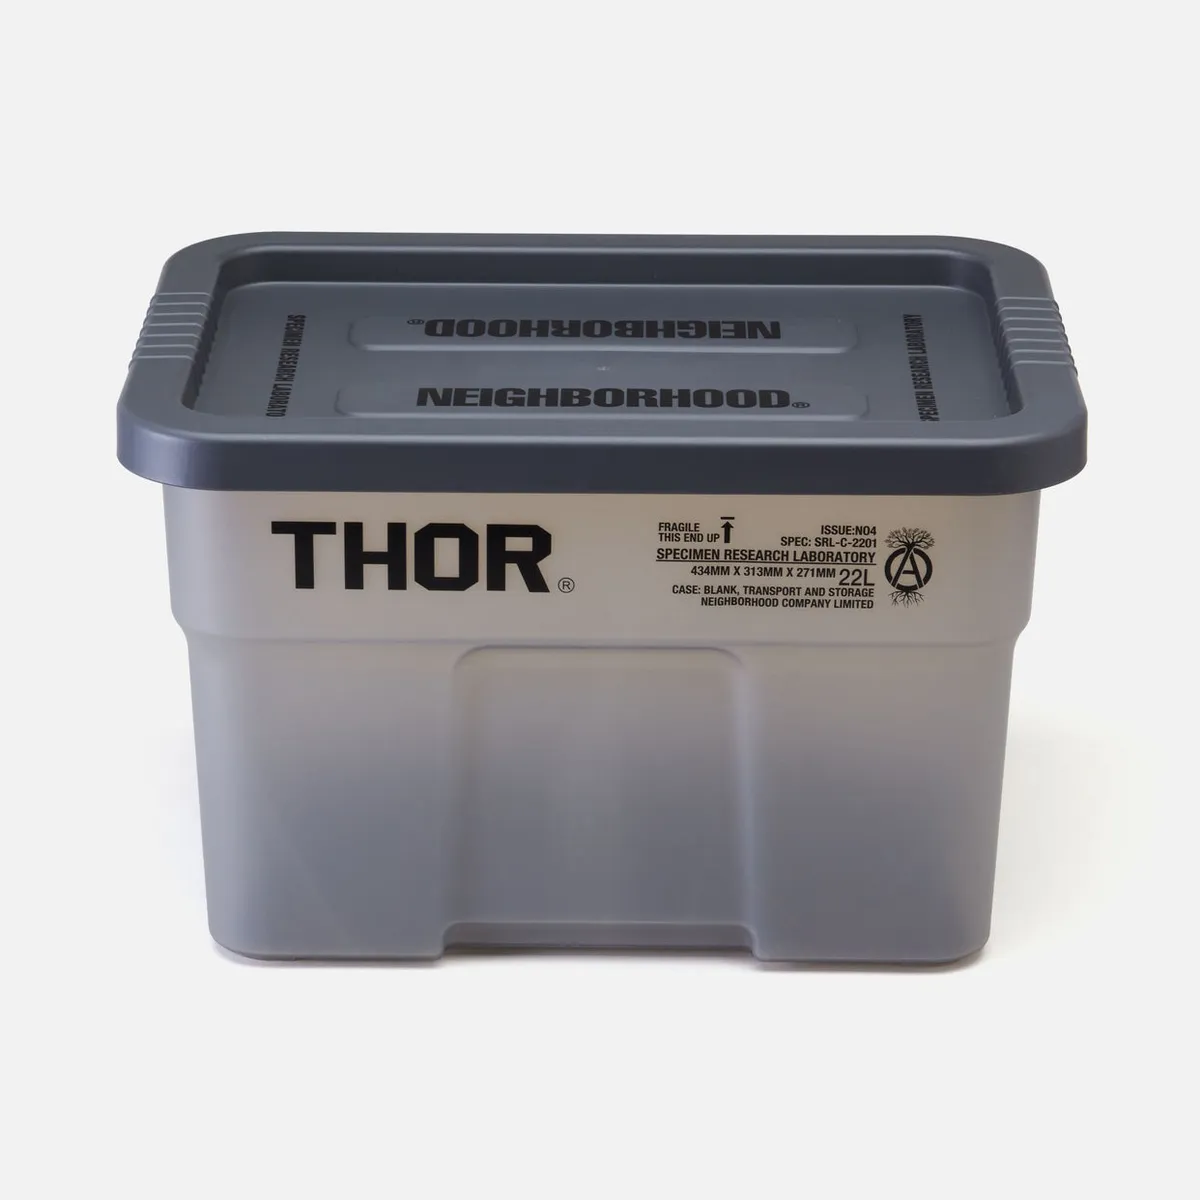 NEIGHBORHOOD SRL .THOR 22 P-TOTES CONTAINER 集裝箱(小)